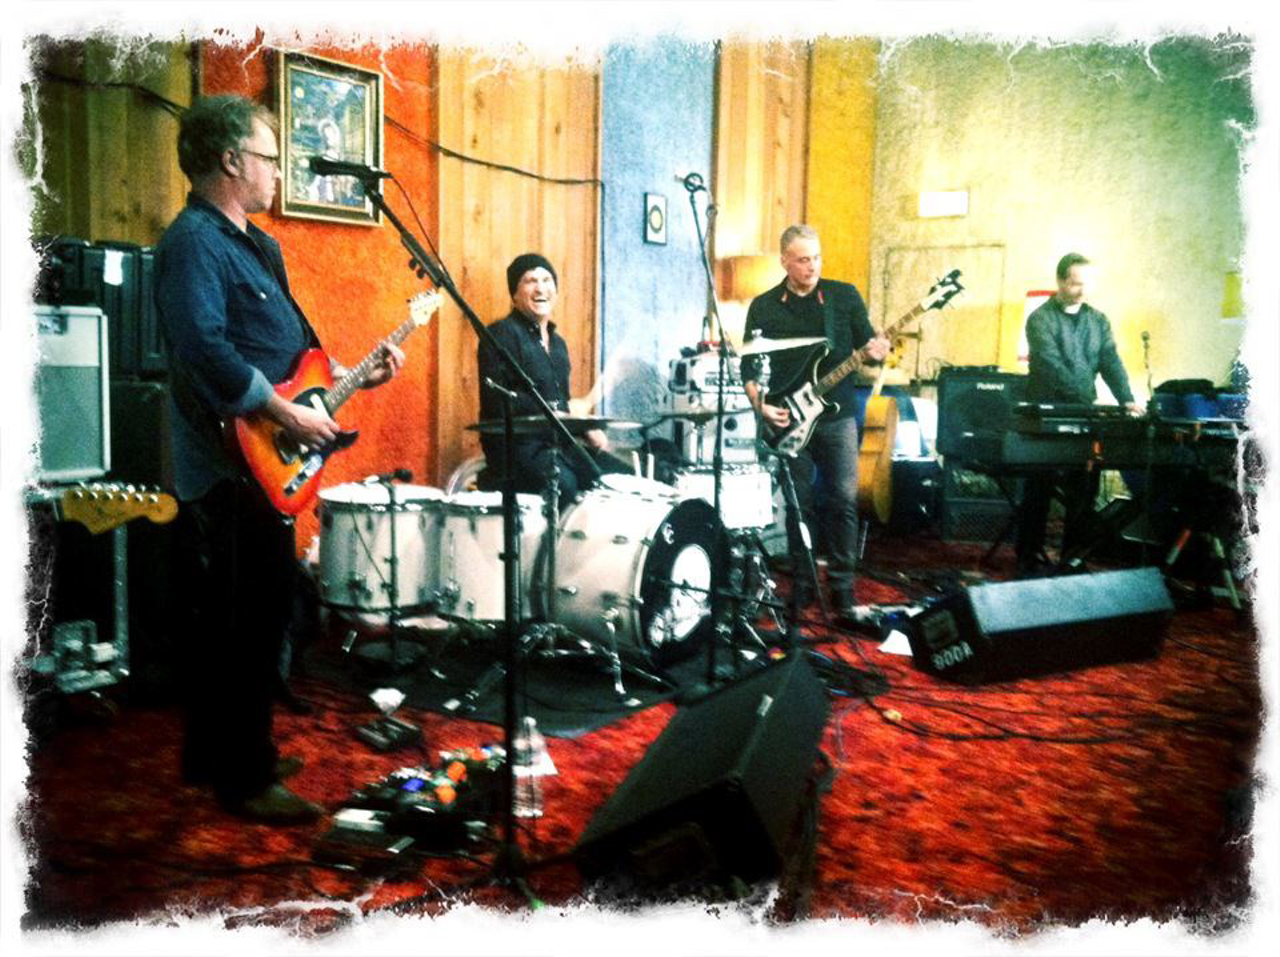 The Afghan Whigs rehearsing for 2012 New Year’s Eve show at Bogart's.